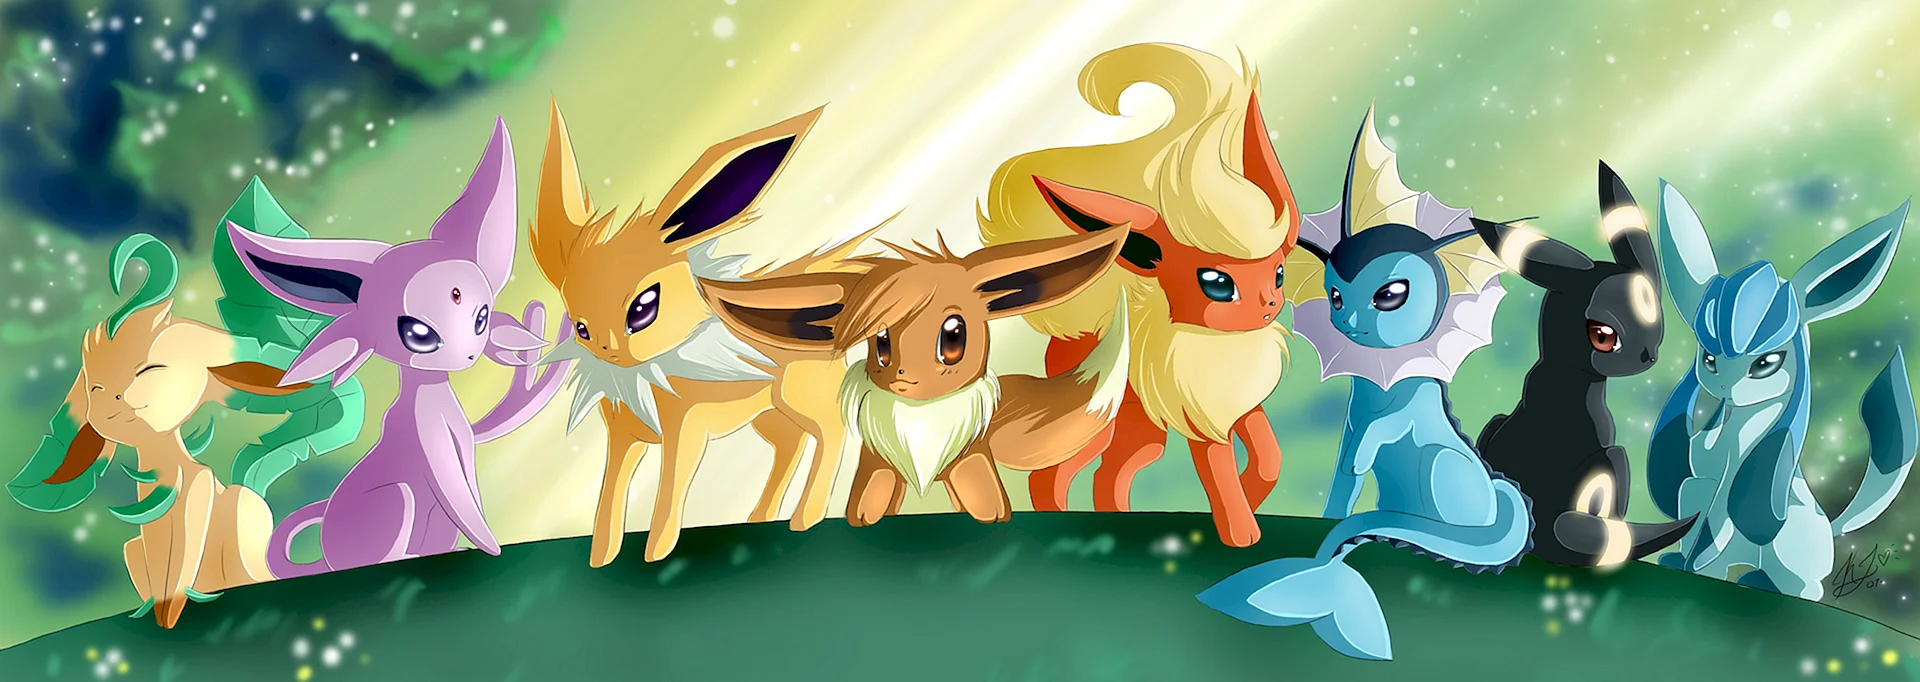 Leafeon And Glaceon Wallpaper